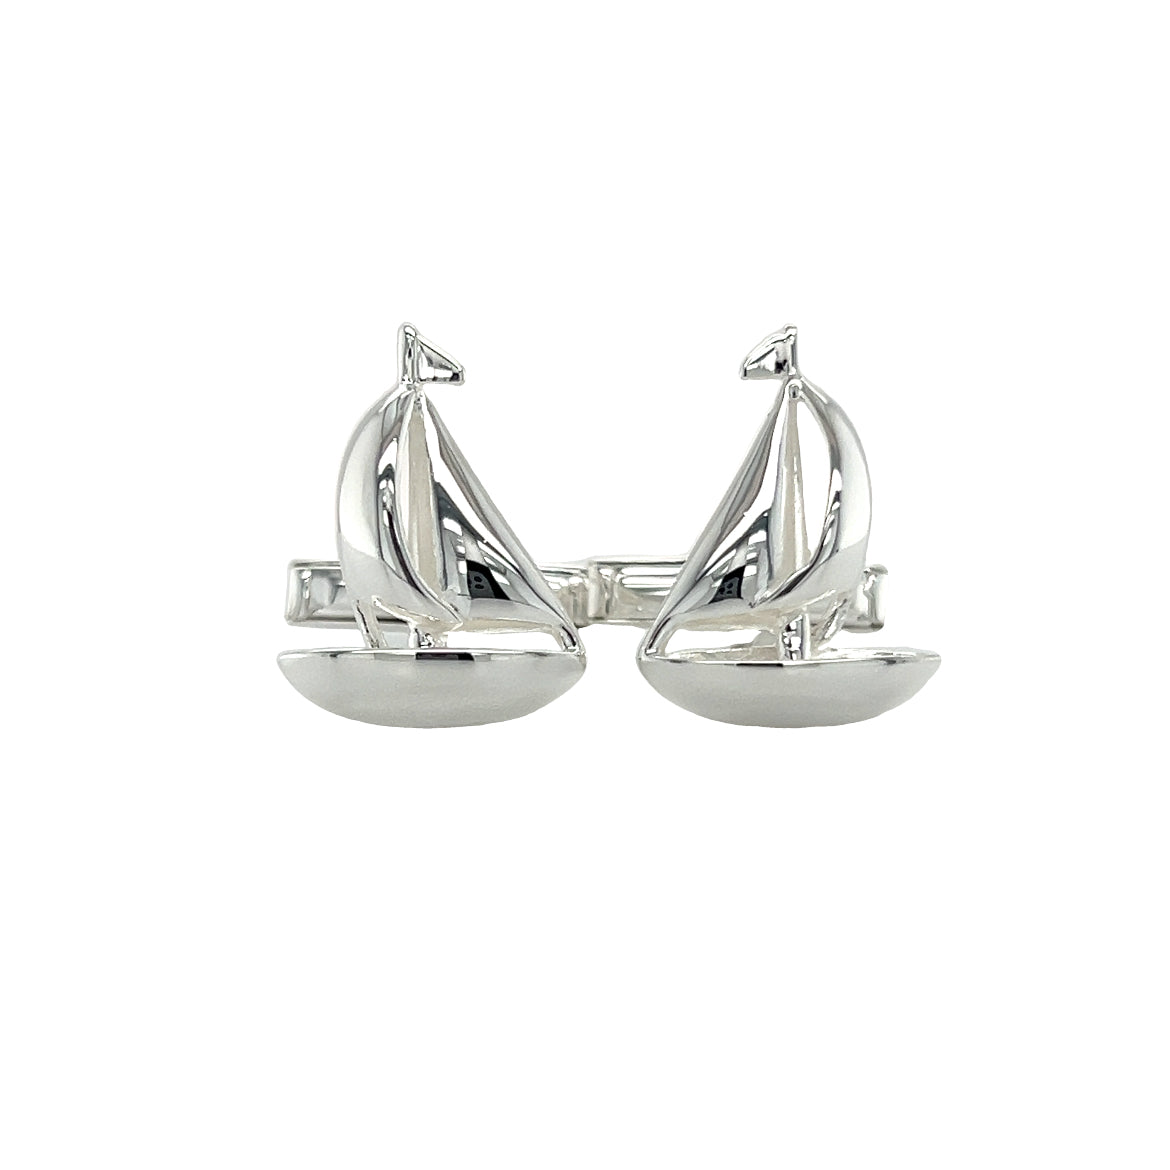 Sail Boat Cufflinks with 3D Details in Sterling Silver Front View